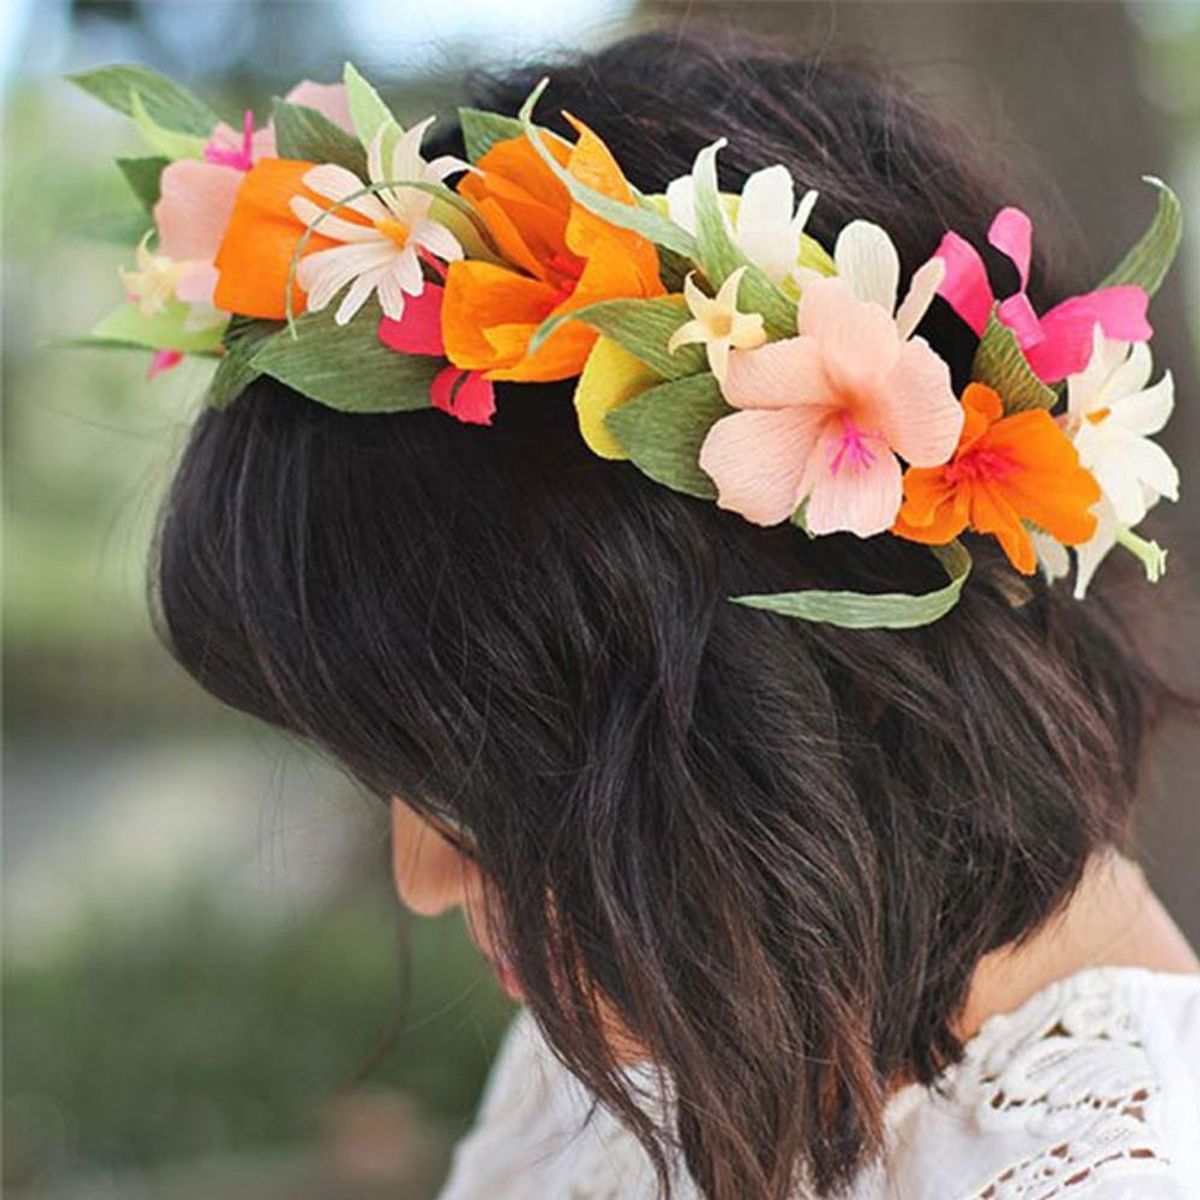 11 Coachella-Approved DIY Paper Flower Crowns